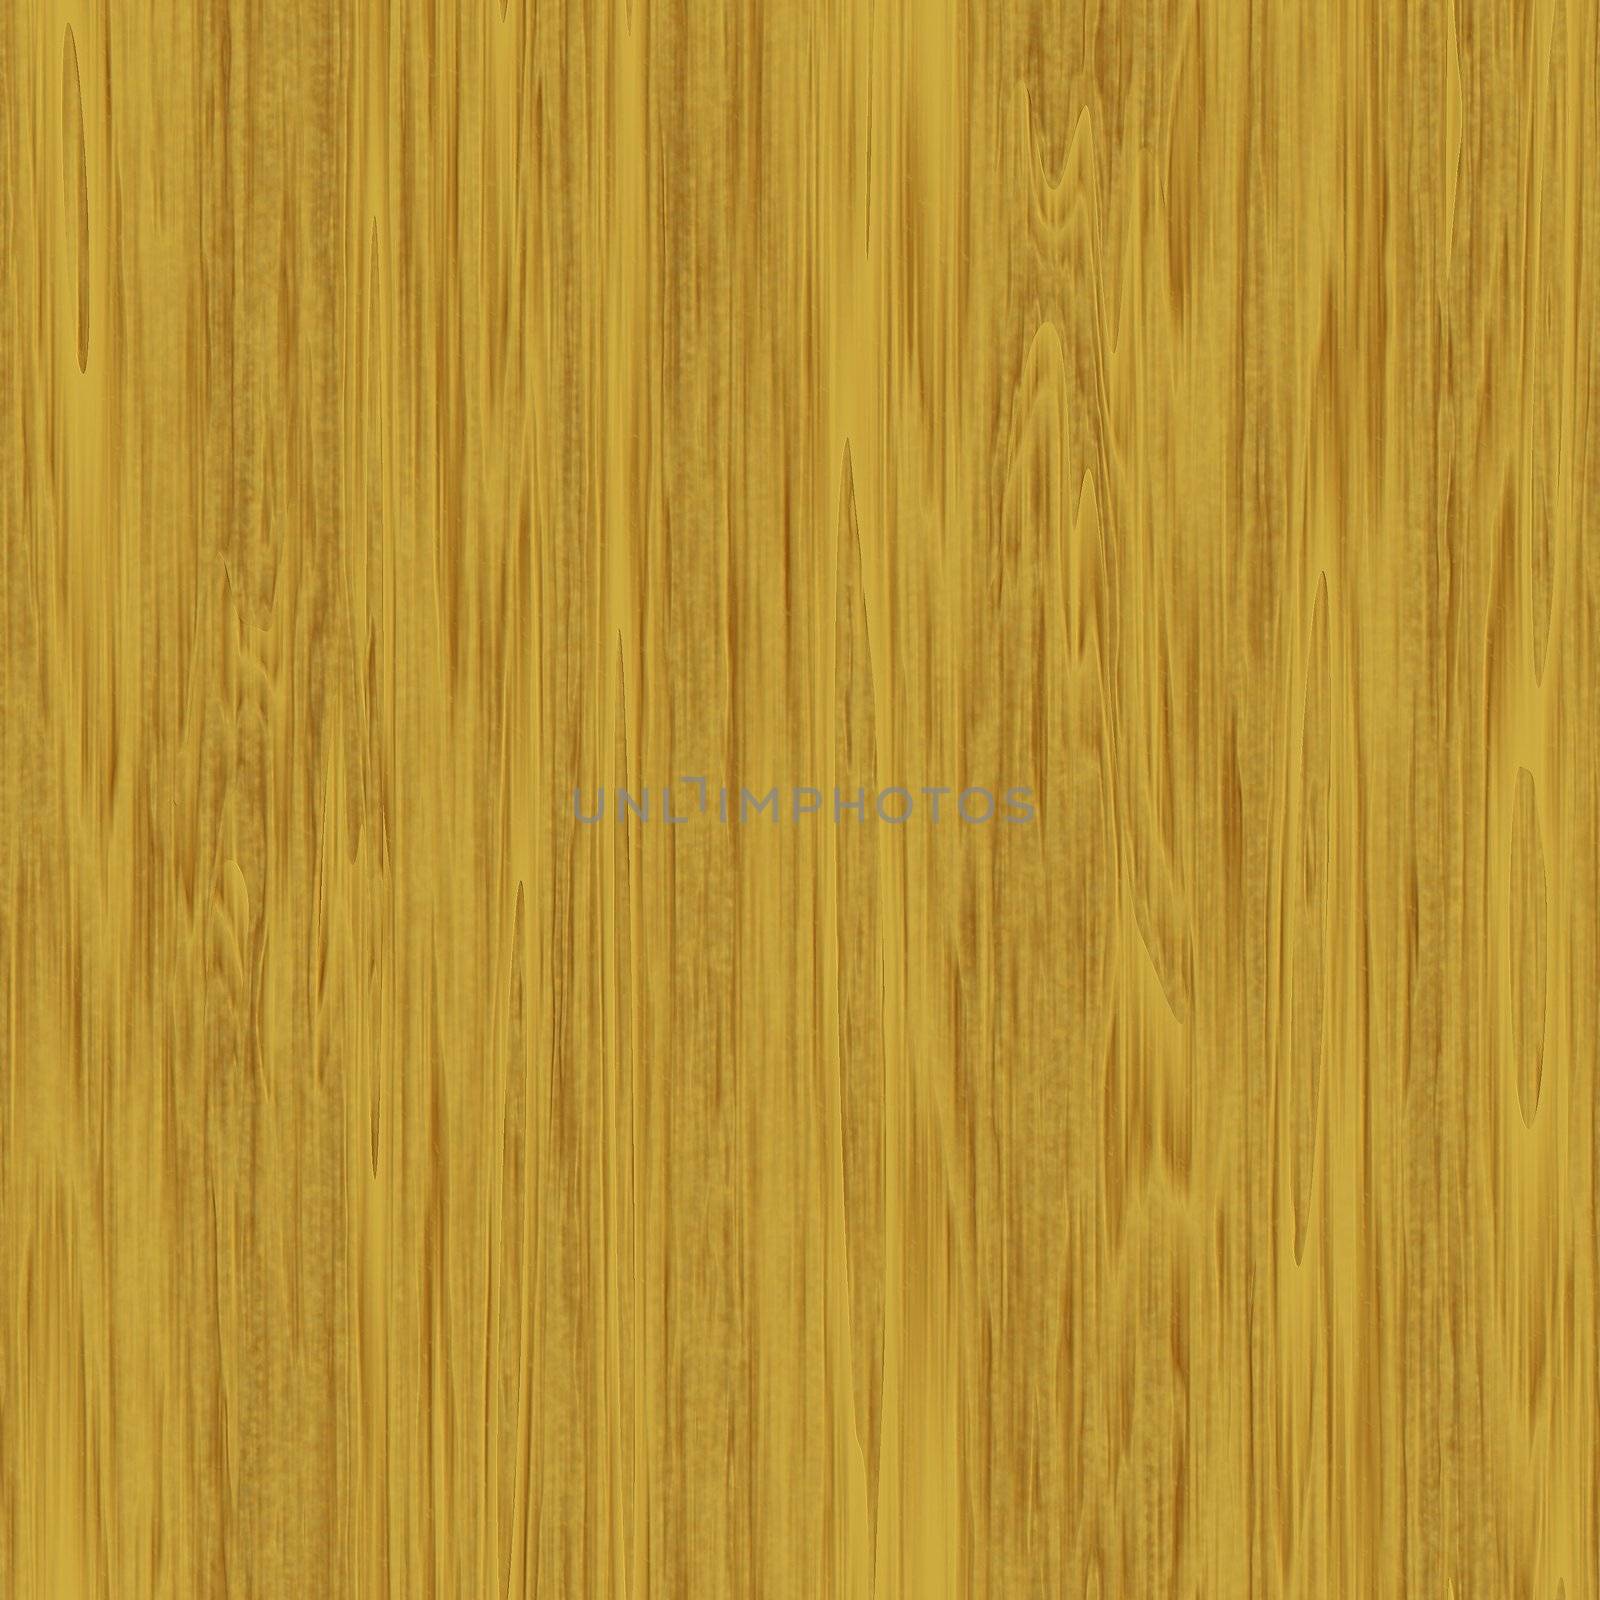 Wood Background Design Element as Simple Texture